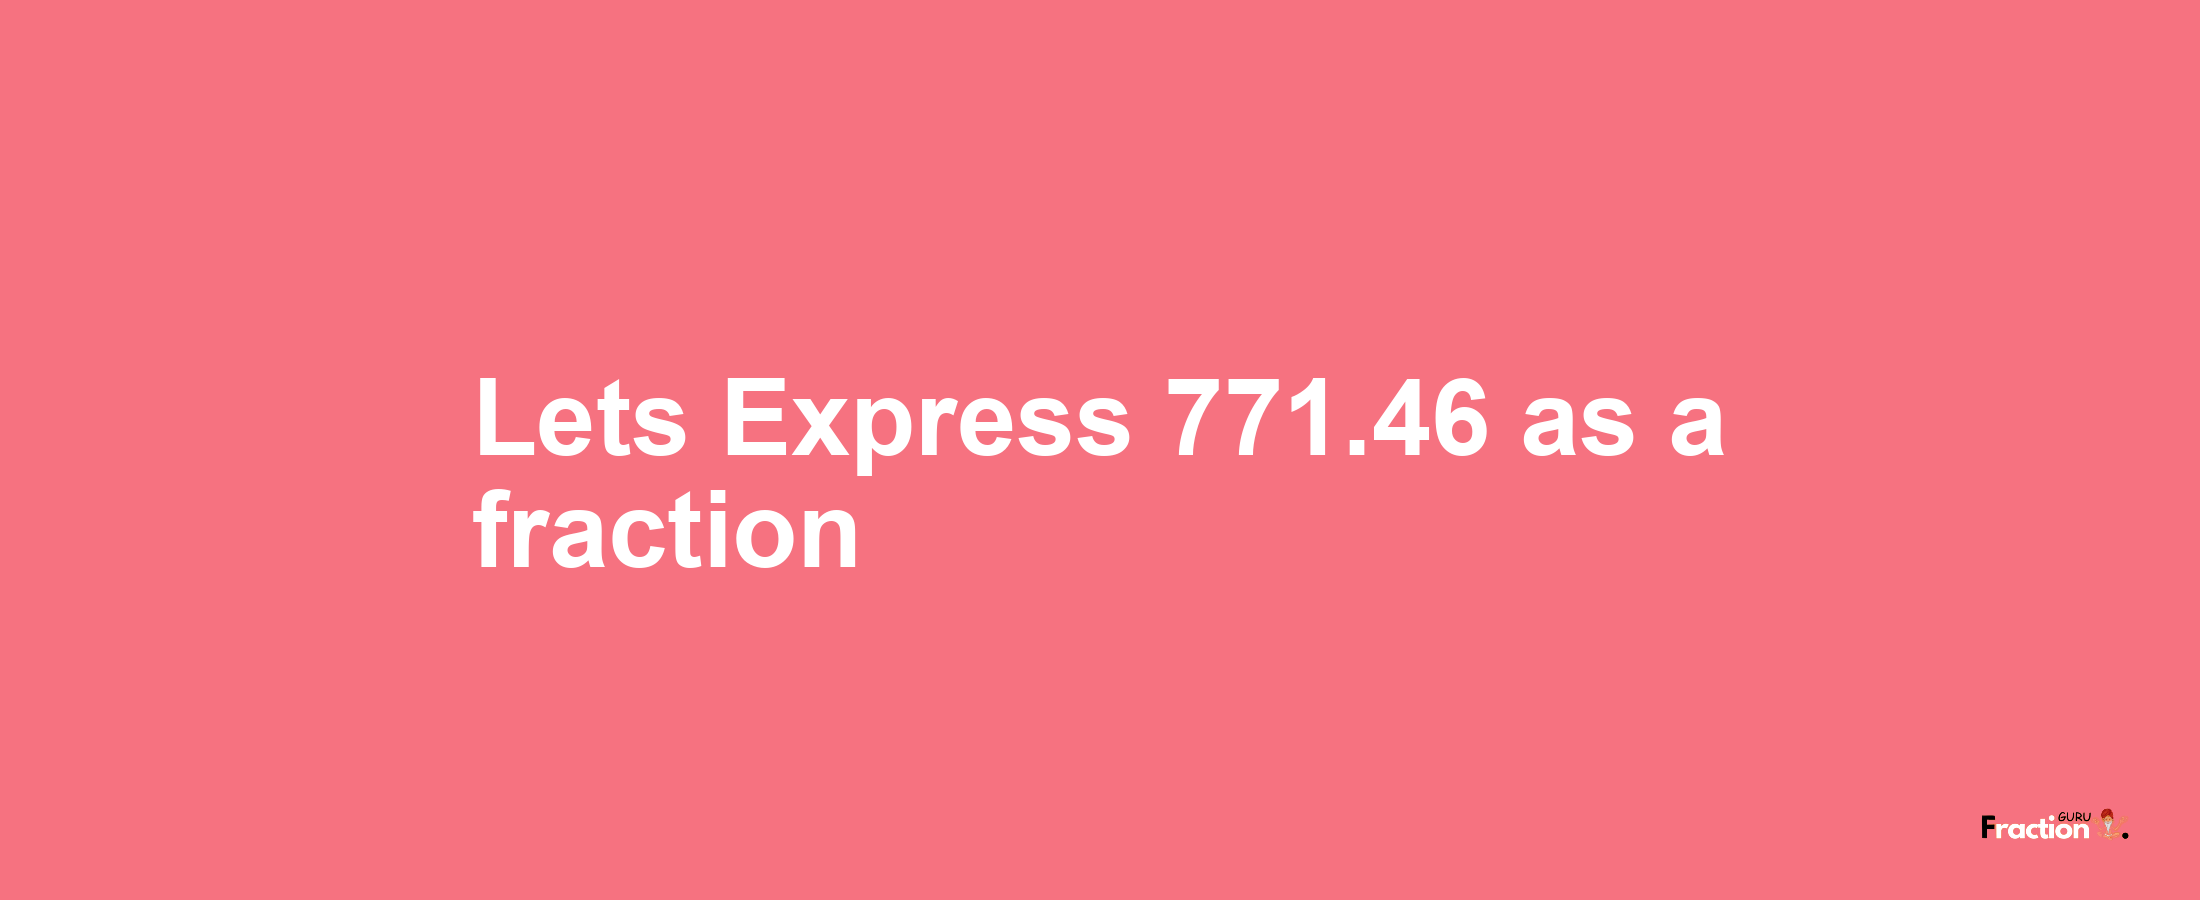 Lets Express 771.46 as afraction